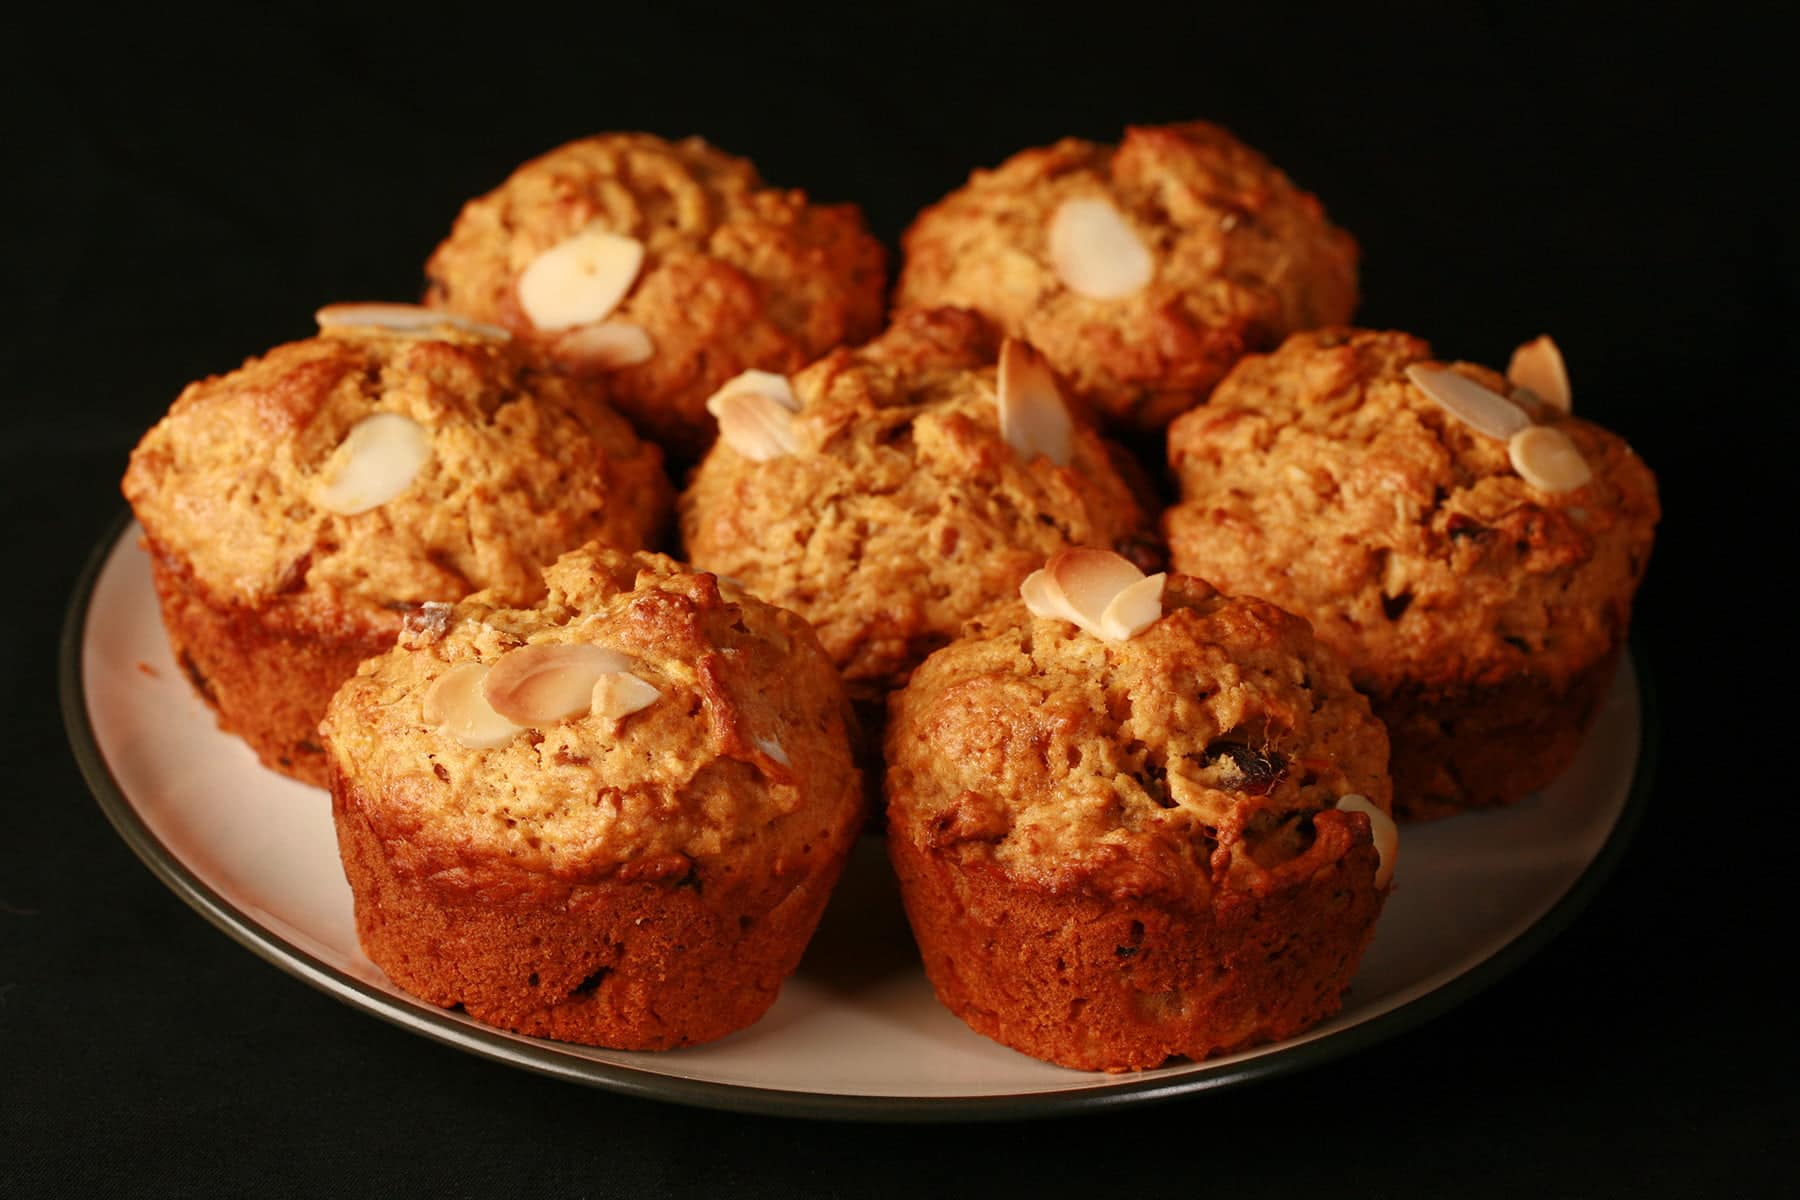 A plate of orange-brown muffins, with slices of almonds and chunks of dates visible throughout.